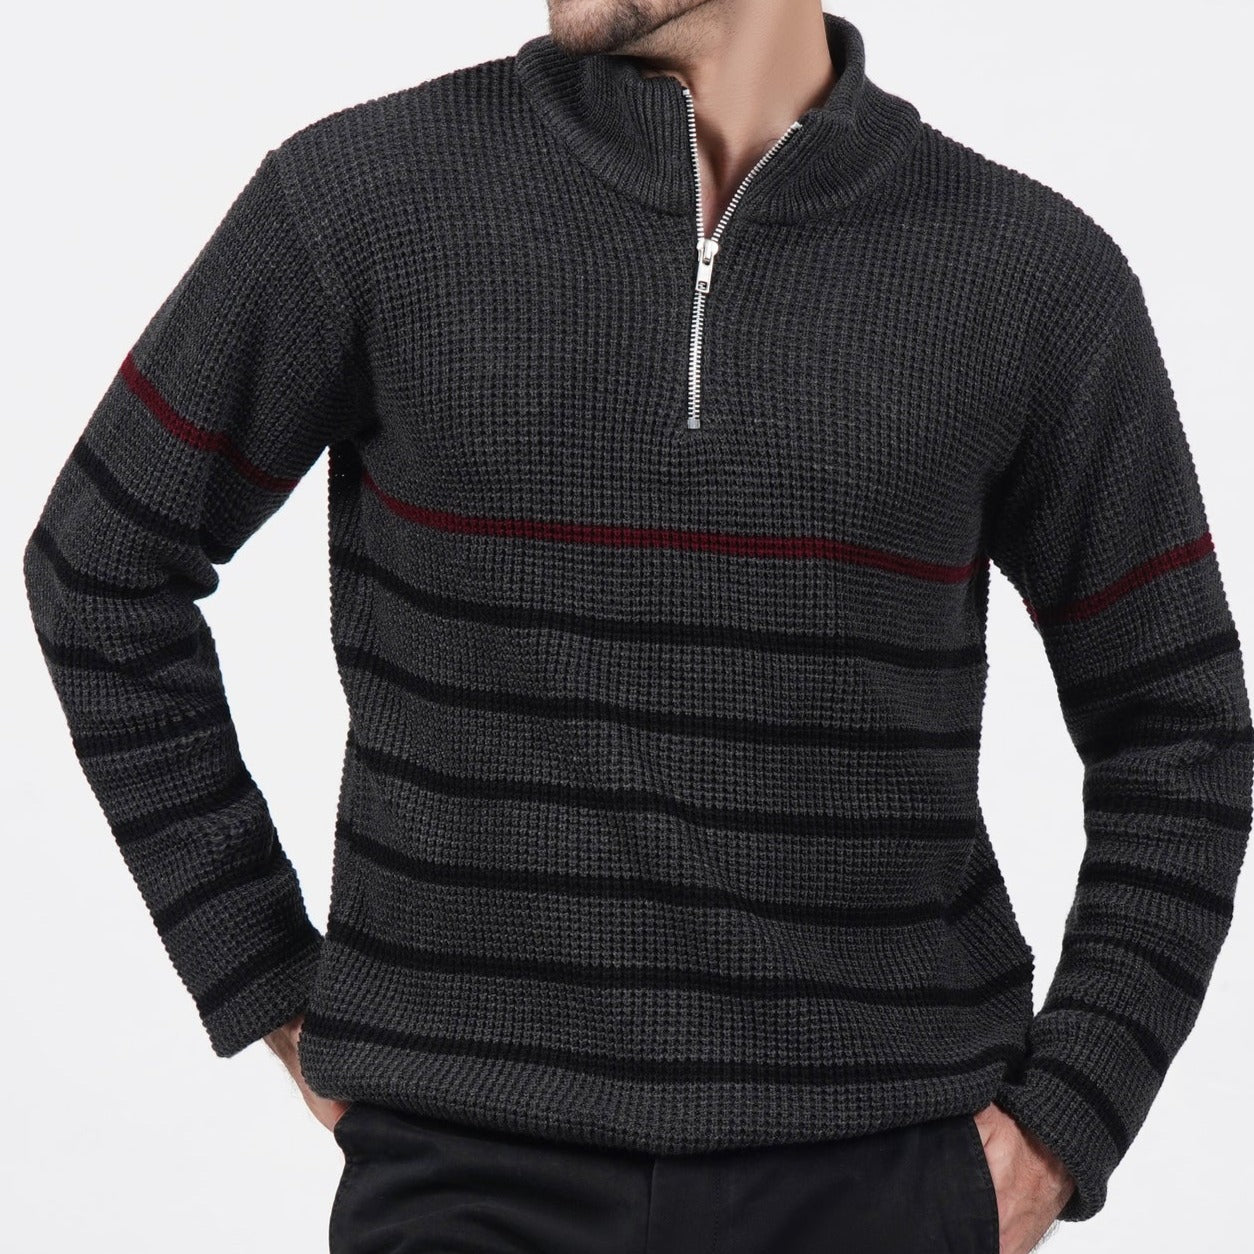 Gray Zipper With Stripes